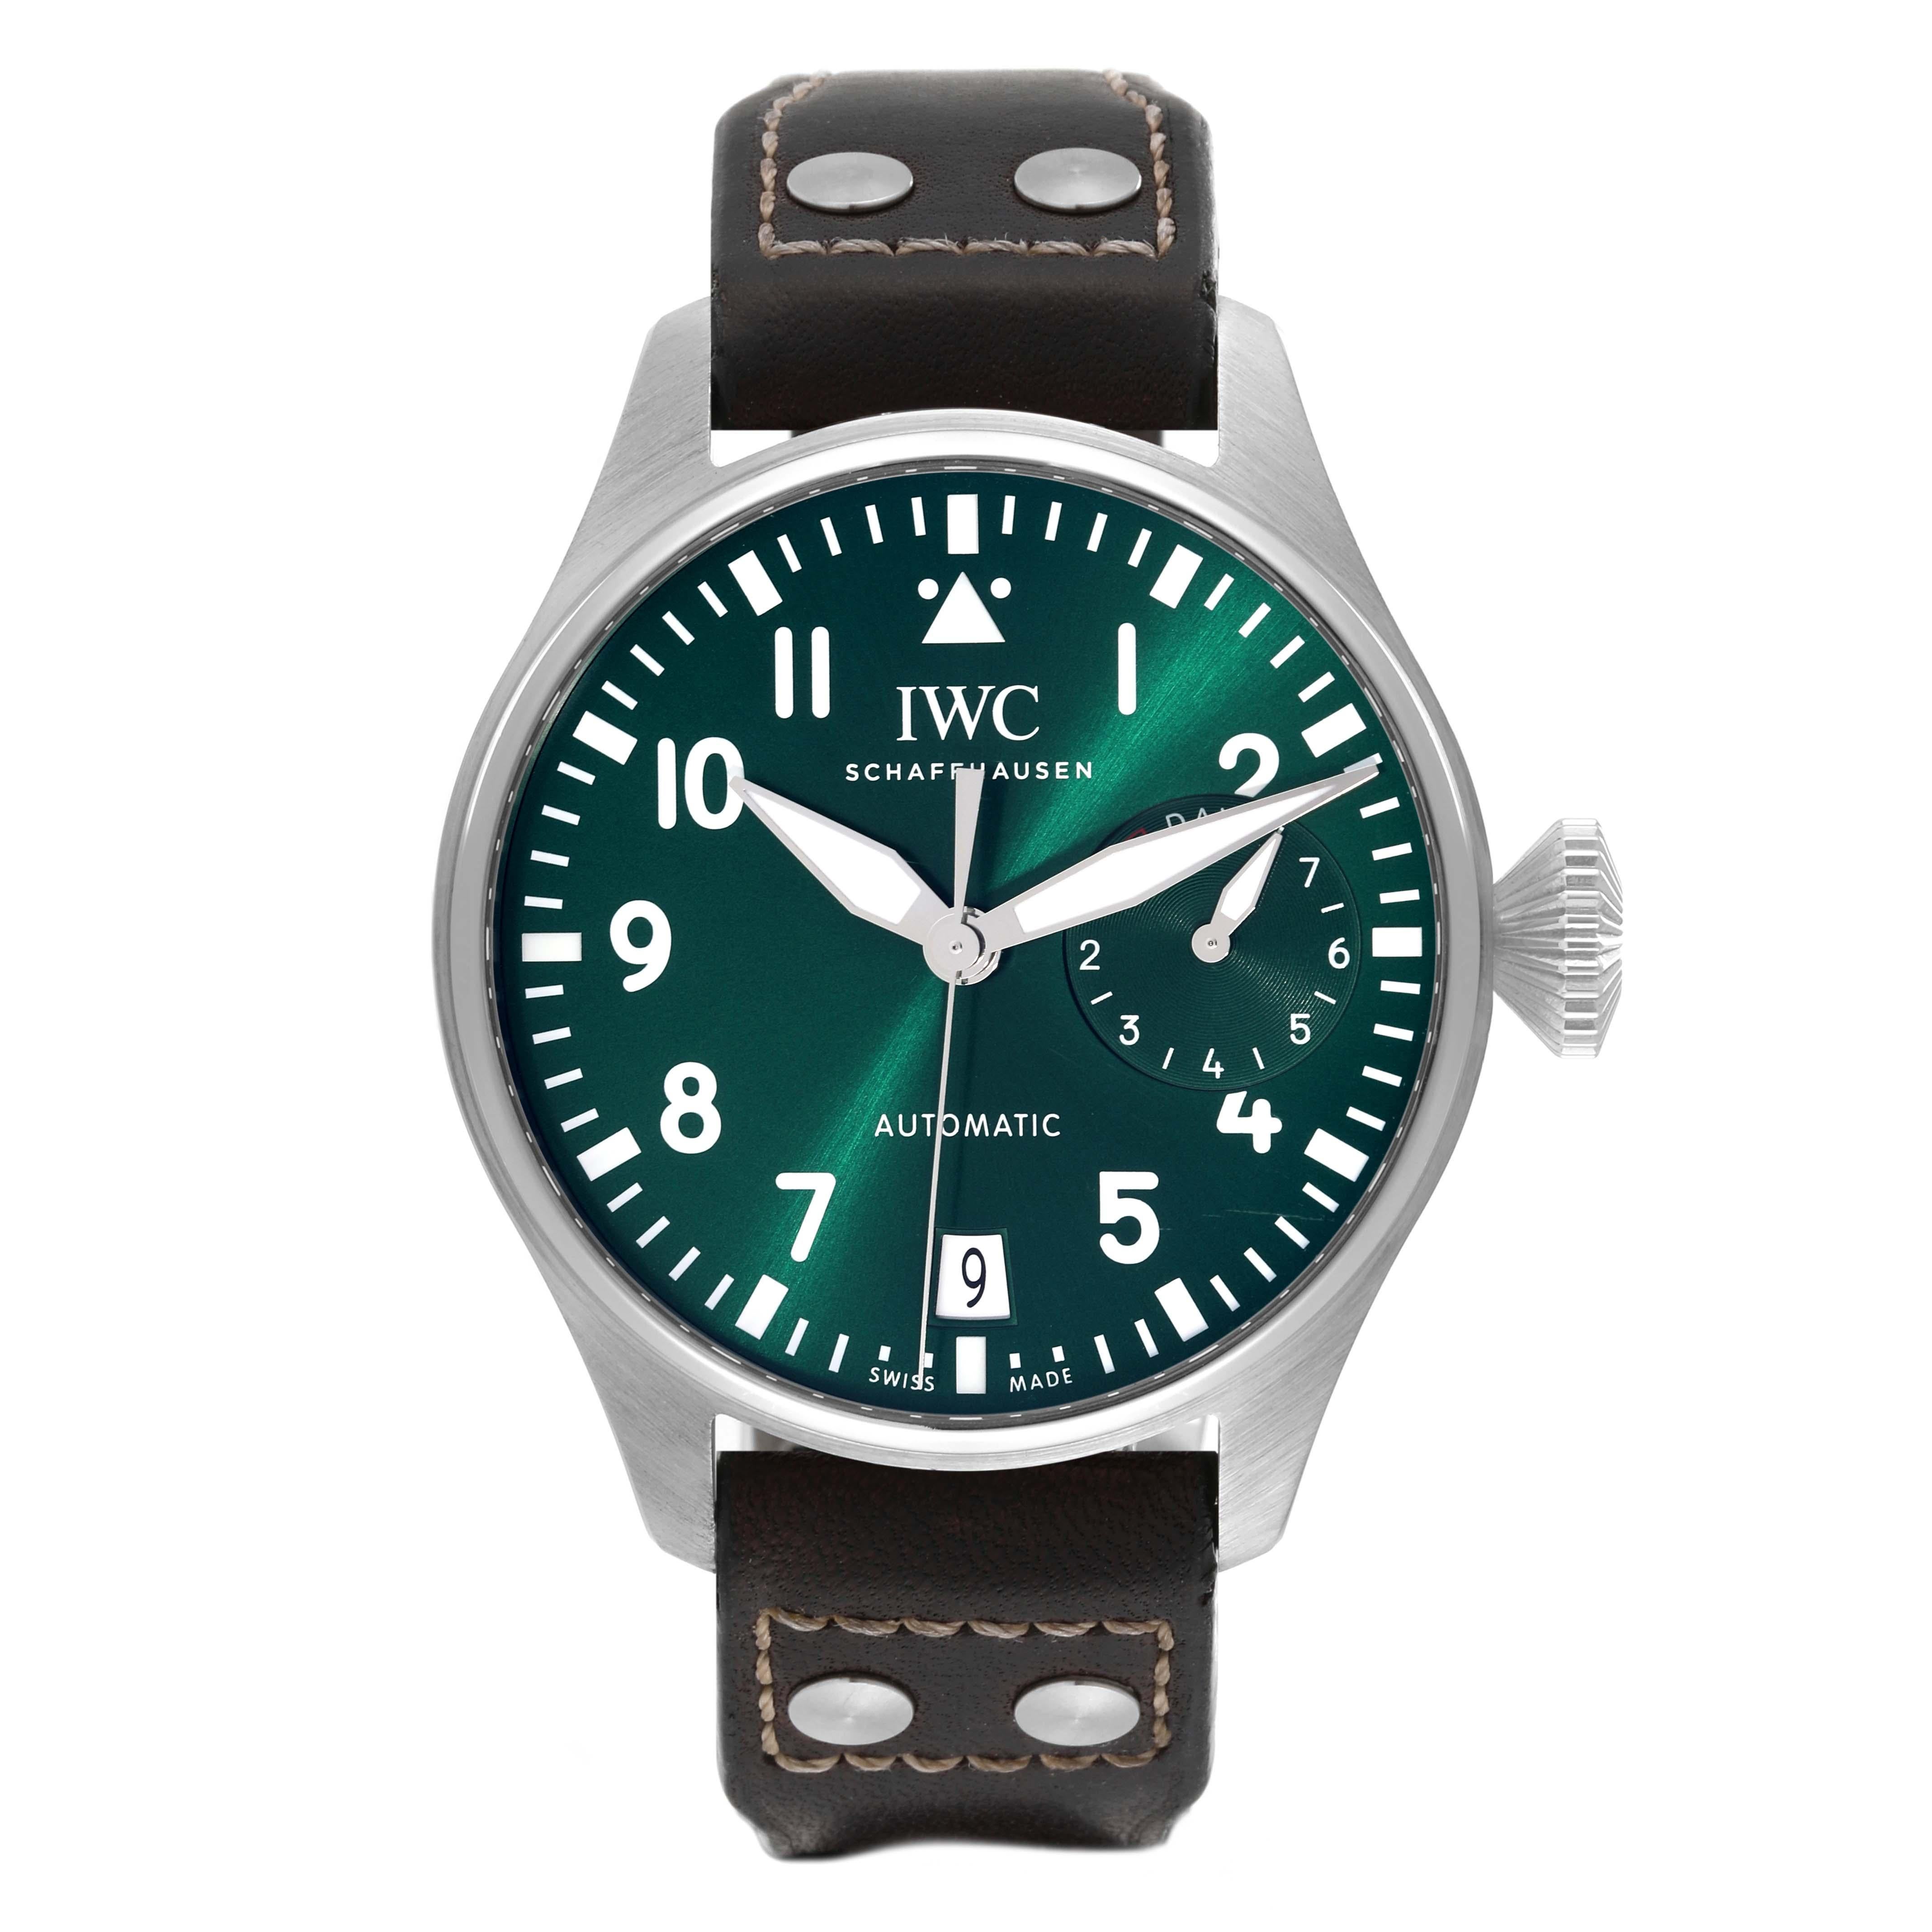 IWC Big Pilots 46mm Green Dial Automatic Steel Mens Watch IW501015 Box Card. Automatic self-winding movement. Stainless steel case 46.2 mm in diameter. . Scratch resistant sapphire crystal. Green dial with Arabic numerals. Luminescent hands and hour